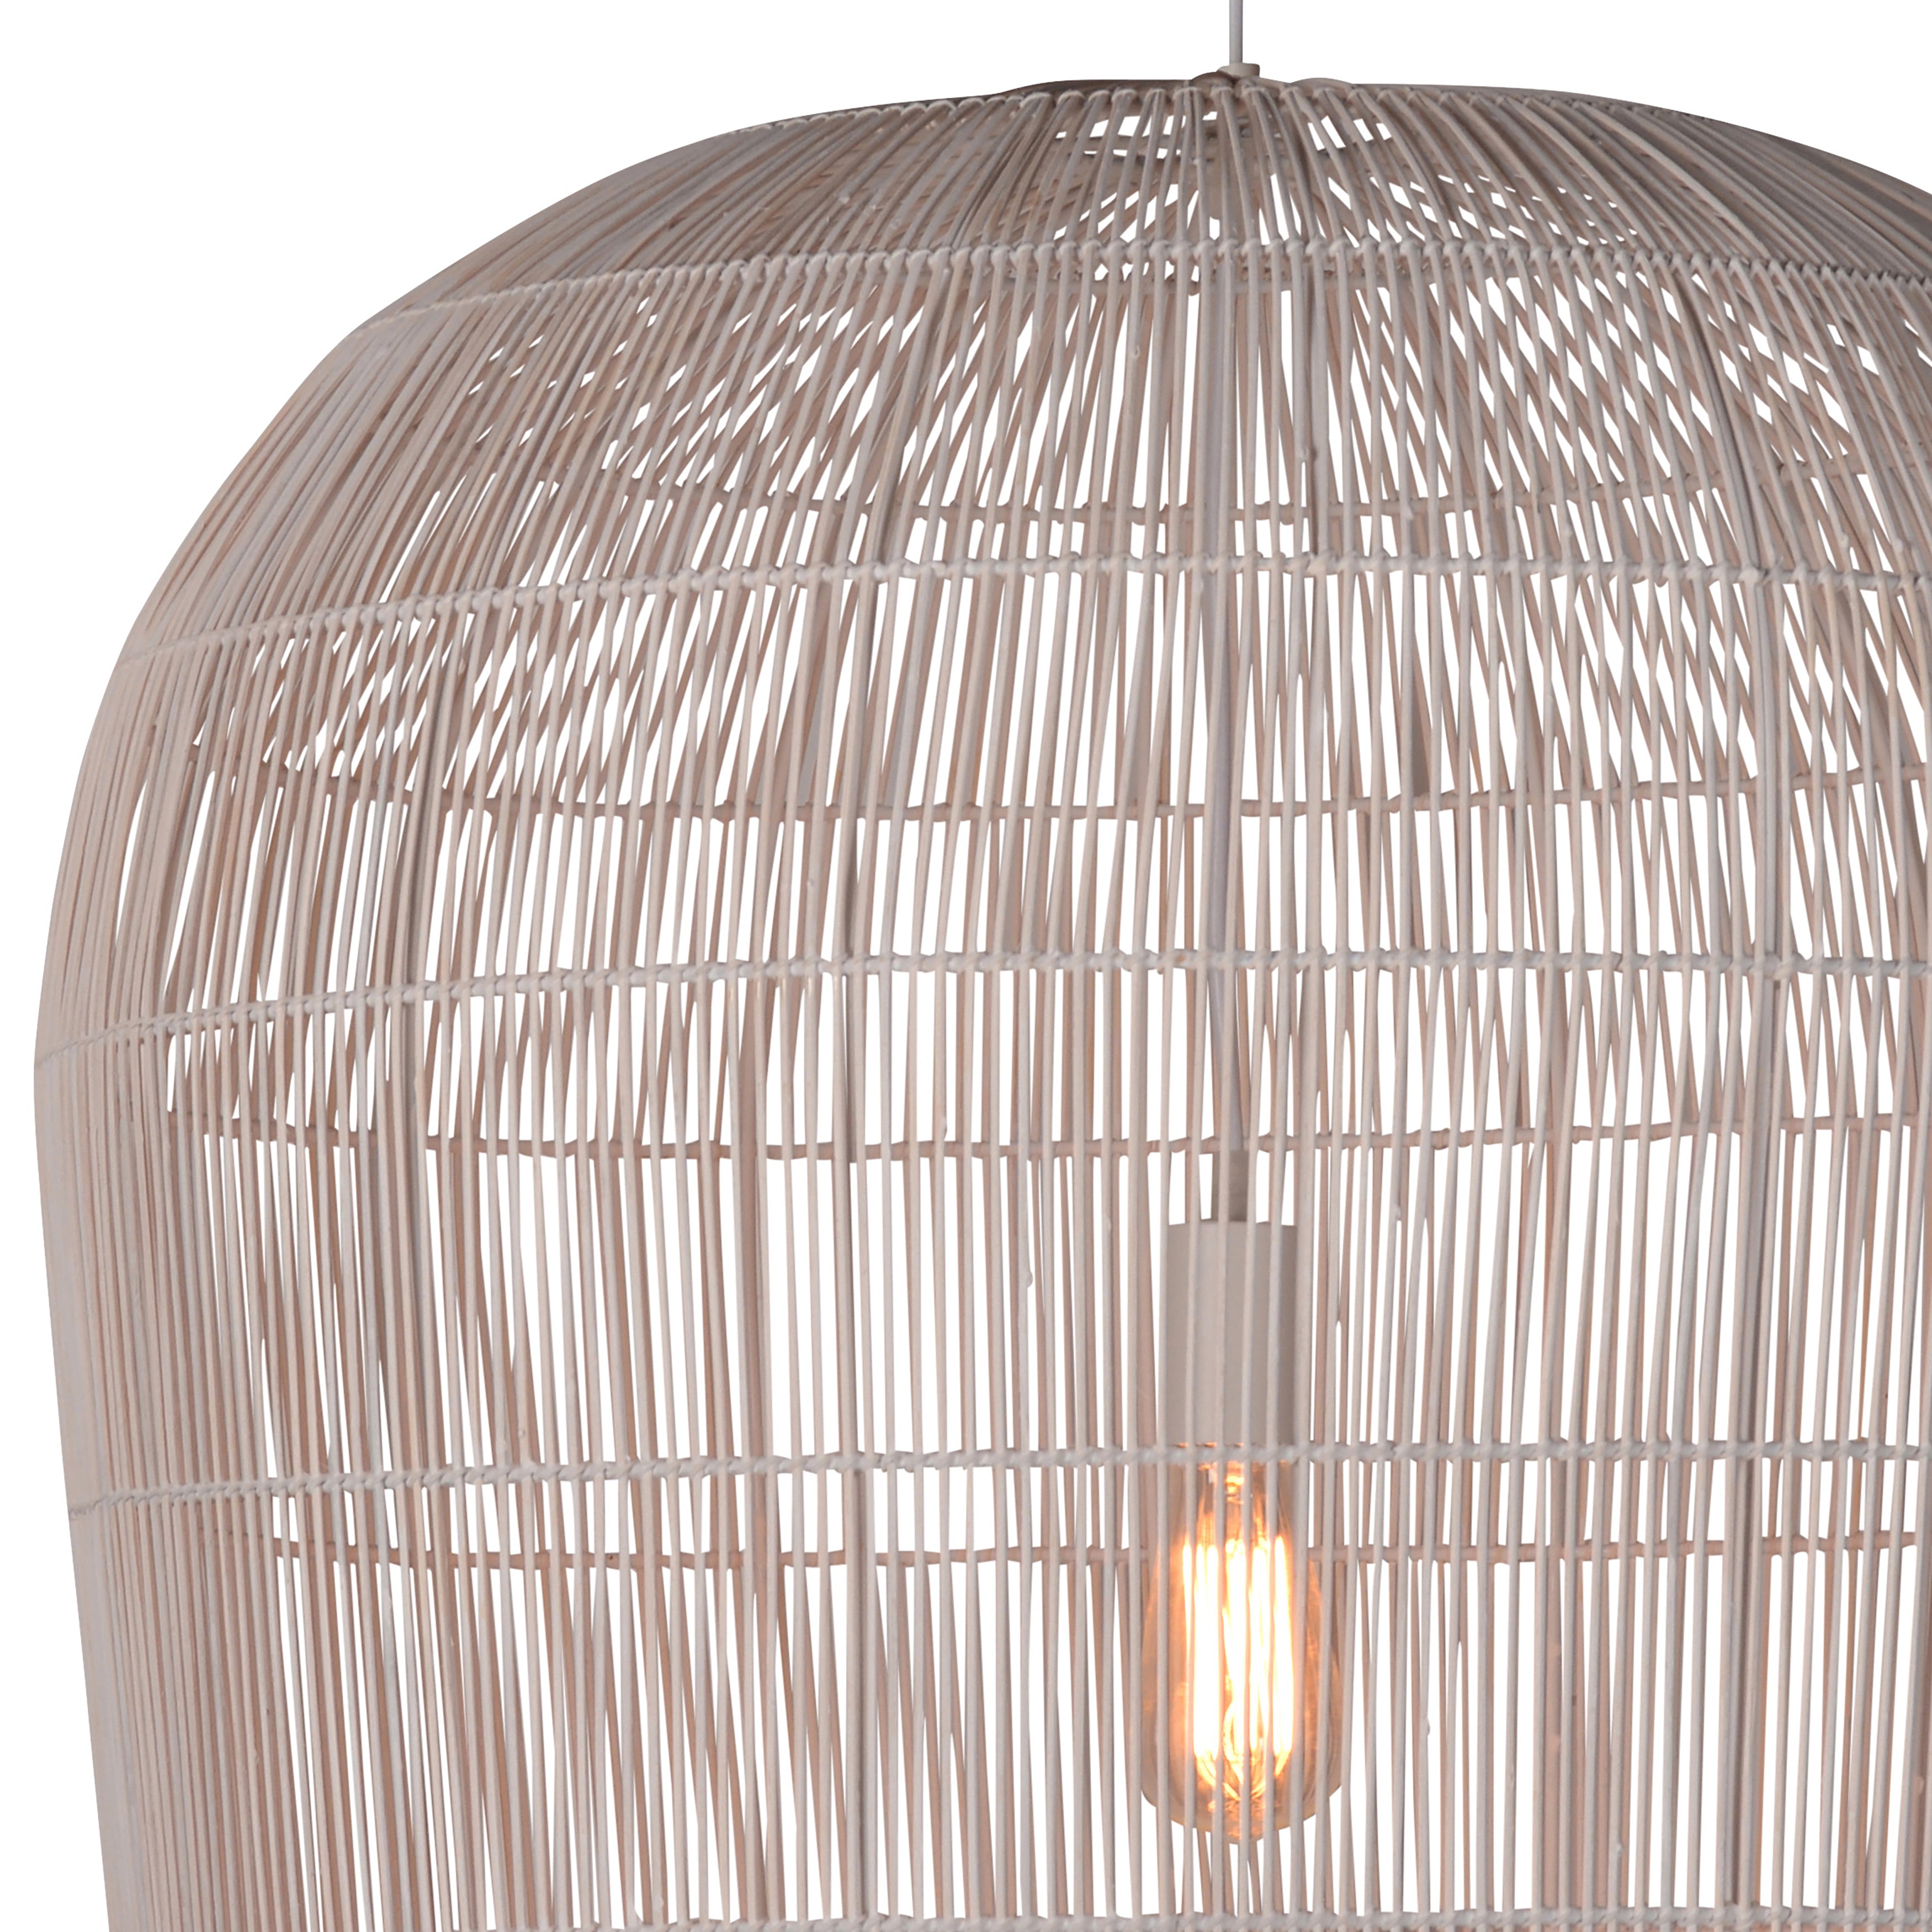 Made from natural rattan, this pendant light adds inviting style and softly diffused ambiance to any room. Remarkably versatile with its cream finish, it works well grouped above a dining table, on its own in a reading nook, or anywhere you want a relaxed touch. The perfect option for a warm and relaxed ambiance.Depth : 28 in Amethyst Home provides interior design, new home construction design consulting, vintage area rugs, and lighting in the Washington metro area.